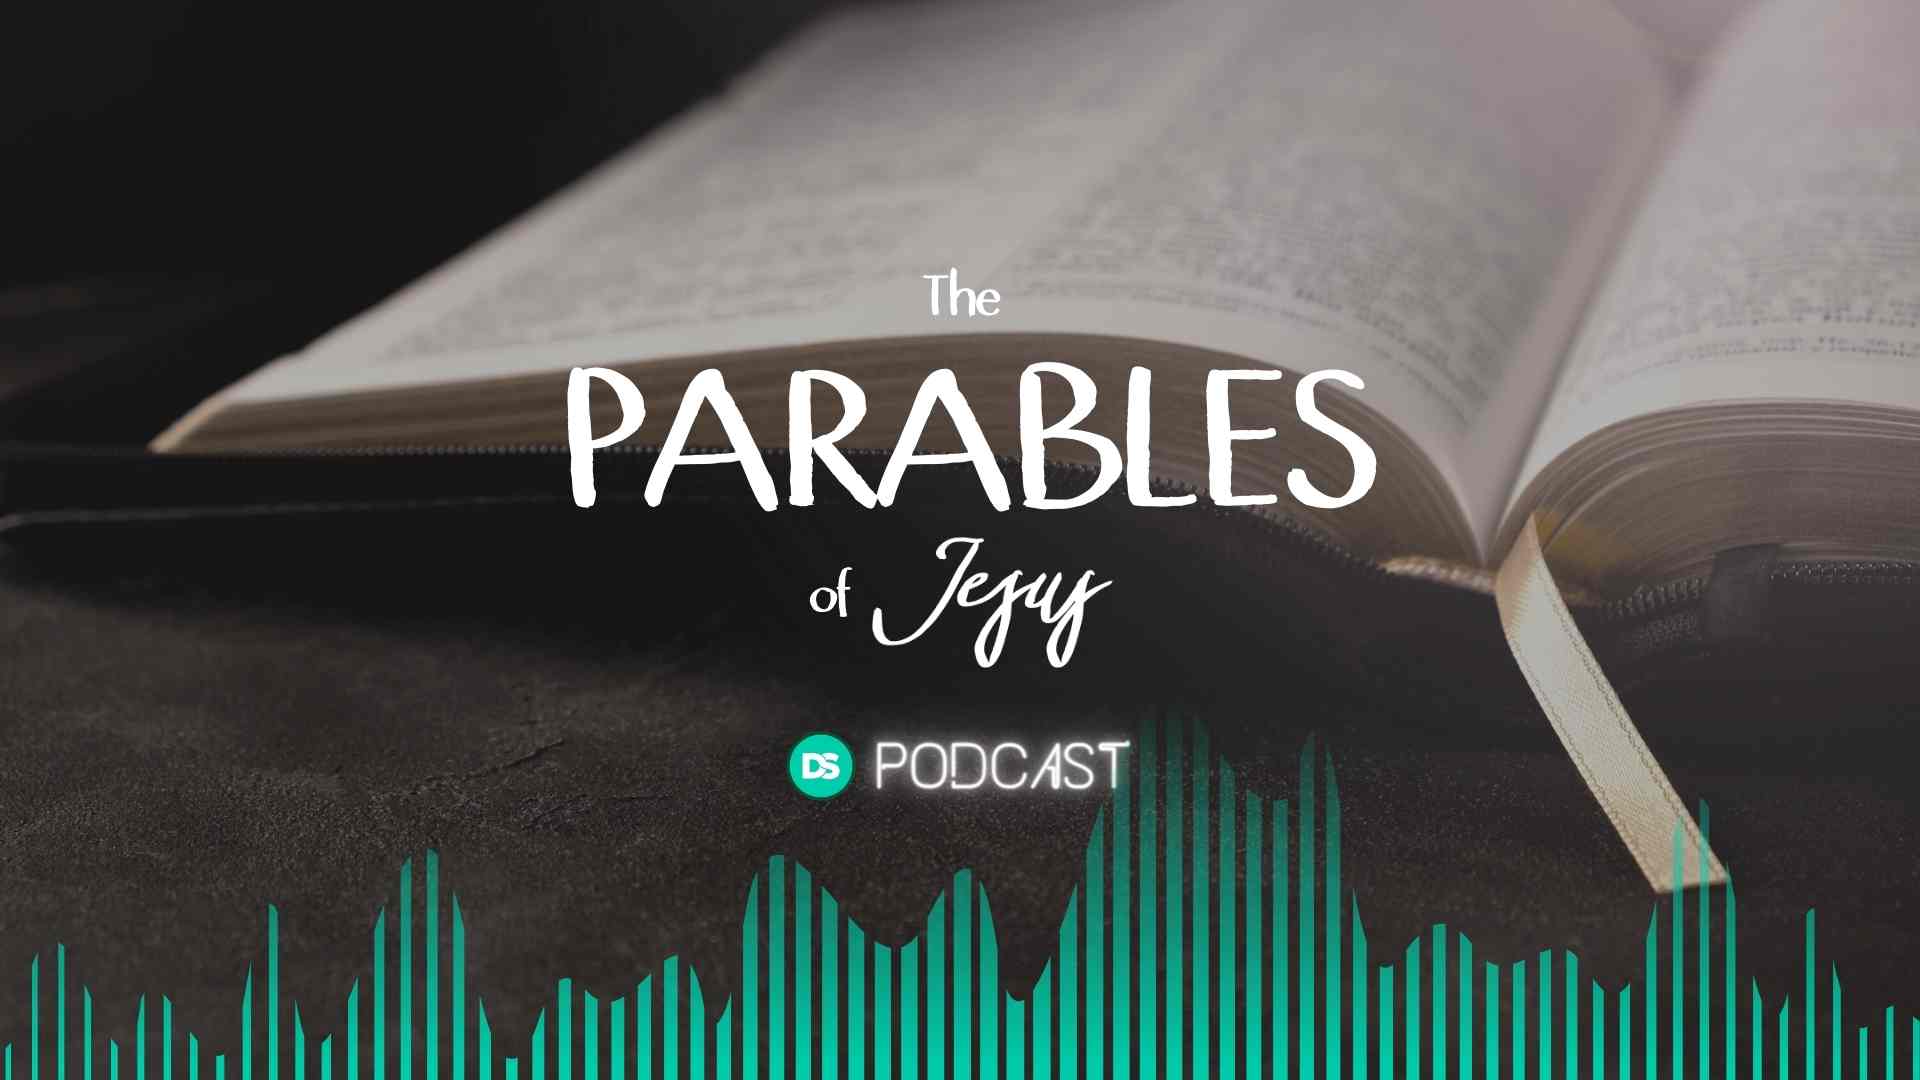 Introducing Our New Series on the Parables of Jesus 4